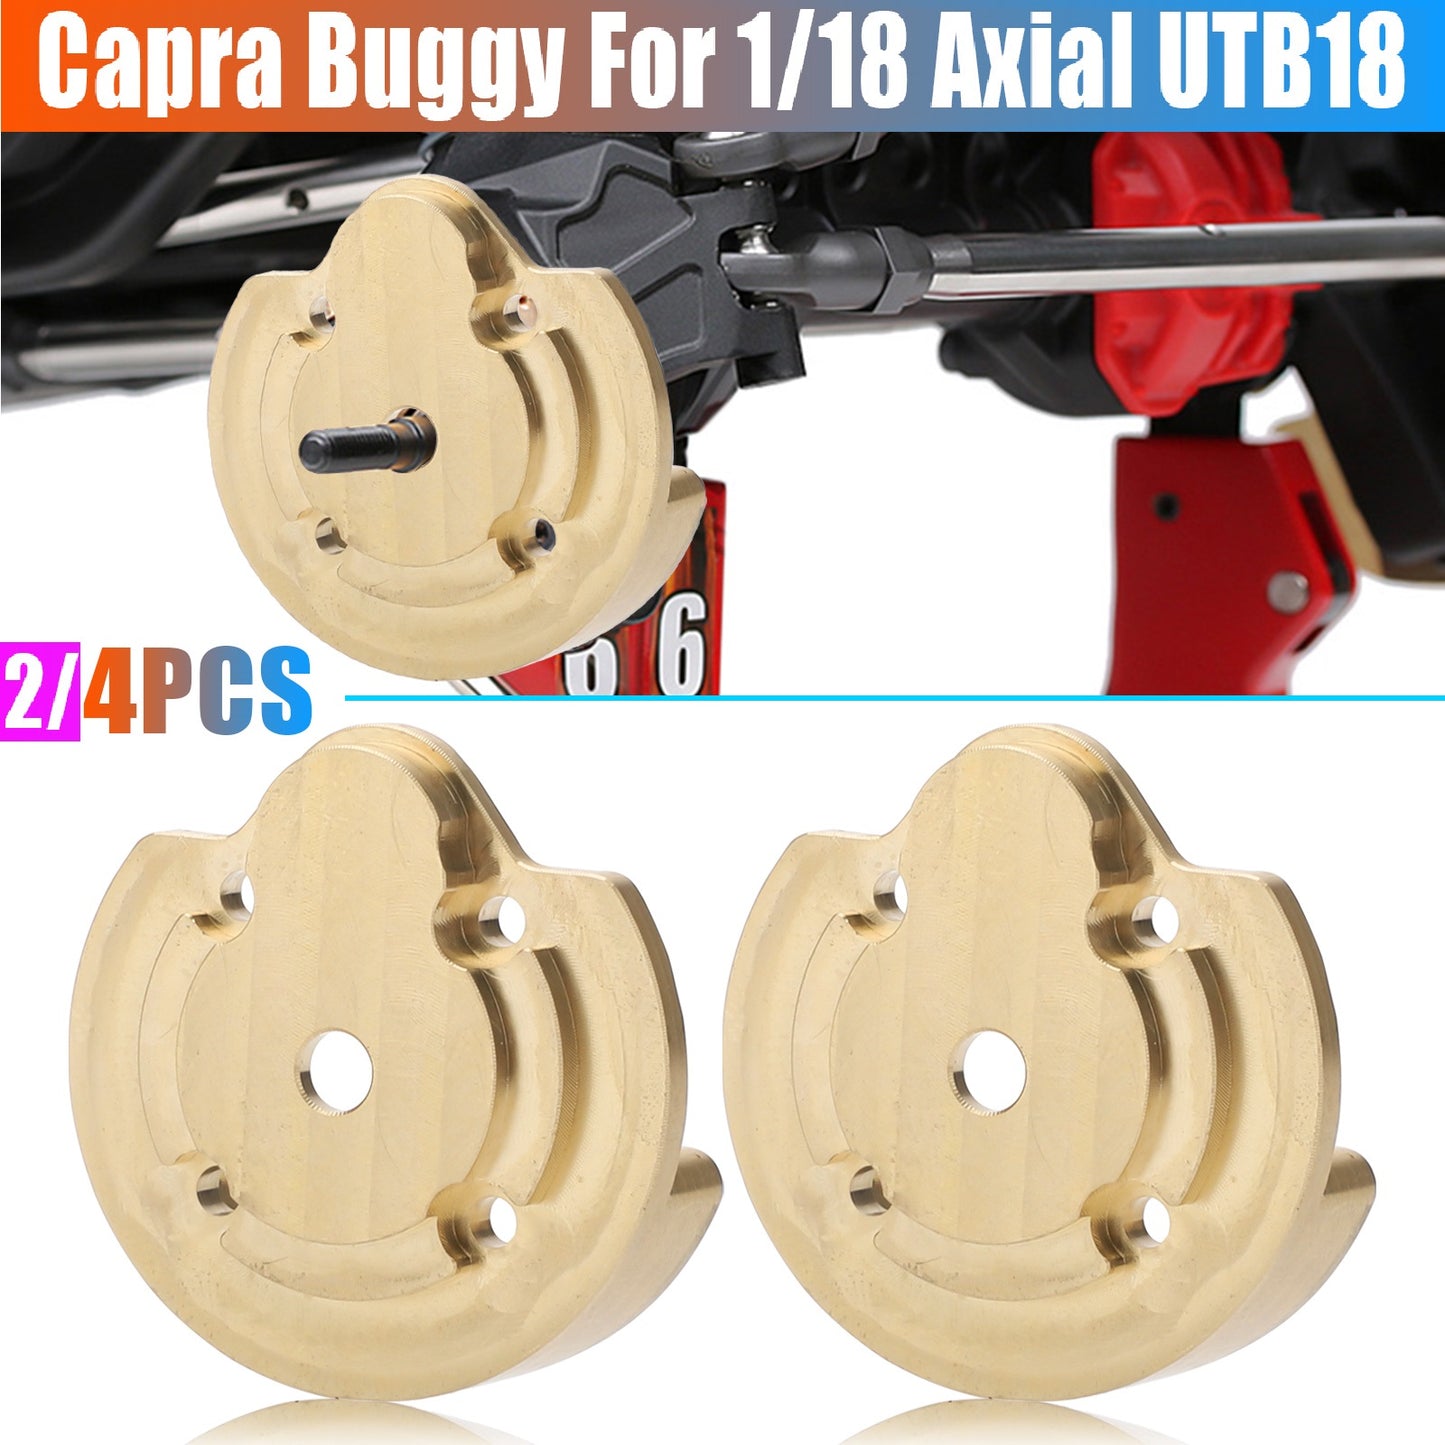 Brass Outer Portal Covers Counterweight for 1/18 Axial UTB18 Capra Buggy